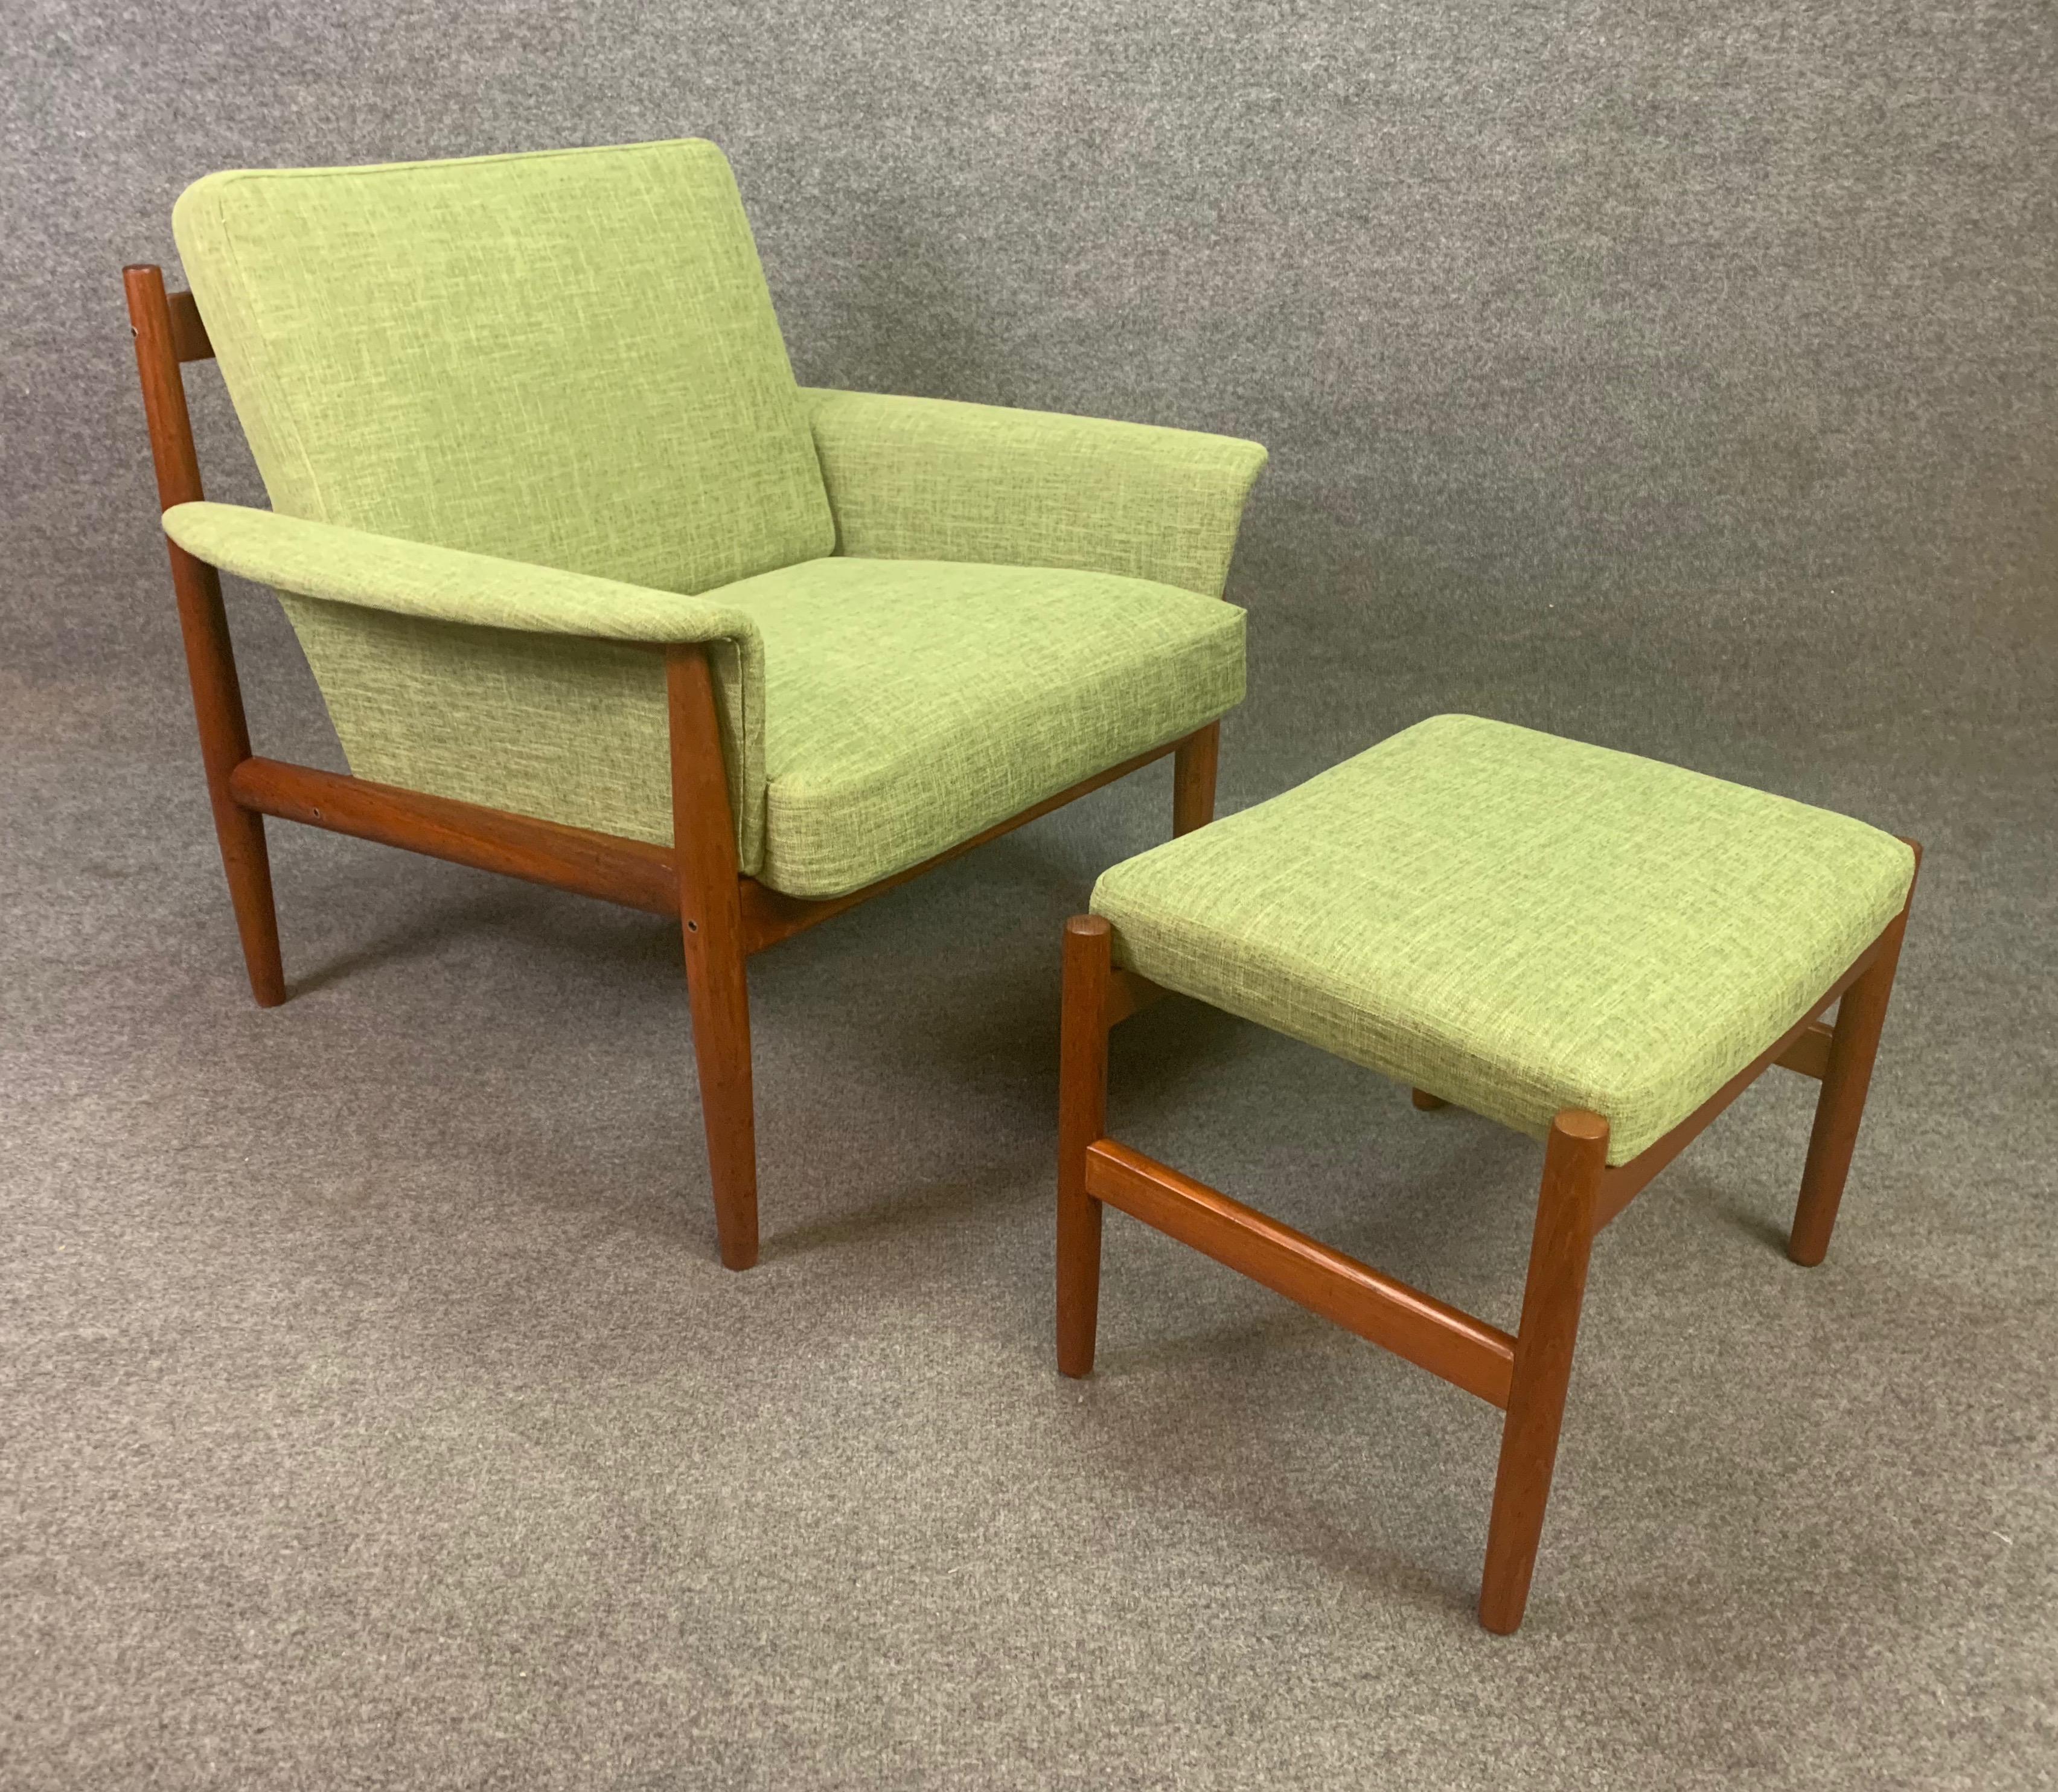 Here is a special Scandinavian Modern set of teak lounge chair (Model 128 by Grete Jalk for France & Son) and ottoman (by Spottrup), both manufactured in Denmark and in the 1960s.
This exquisite set, recently imported from Copenhagen to California